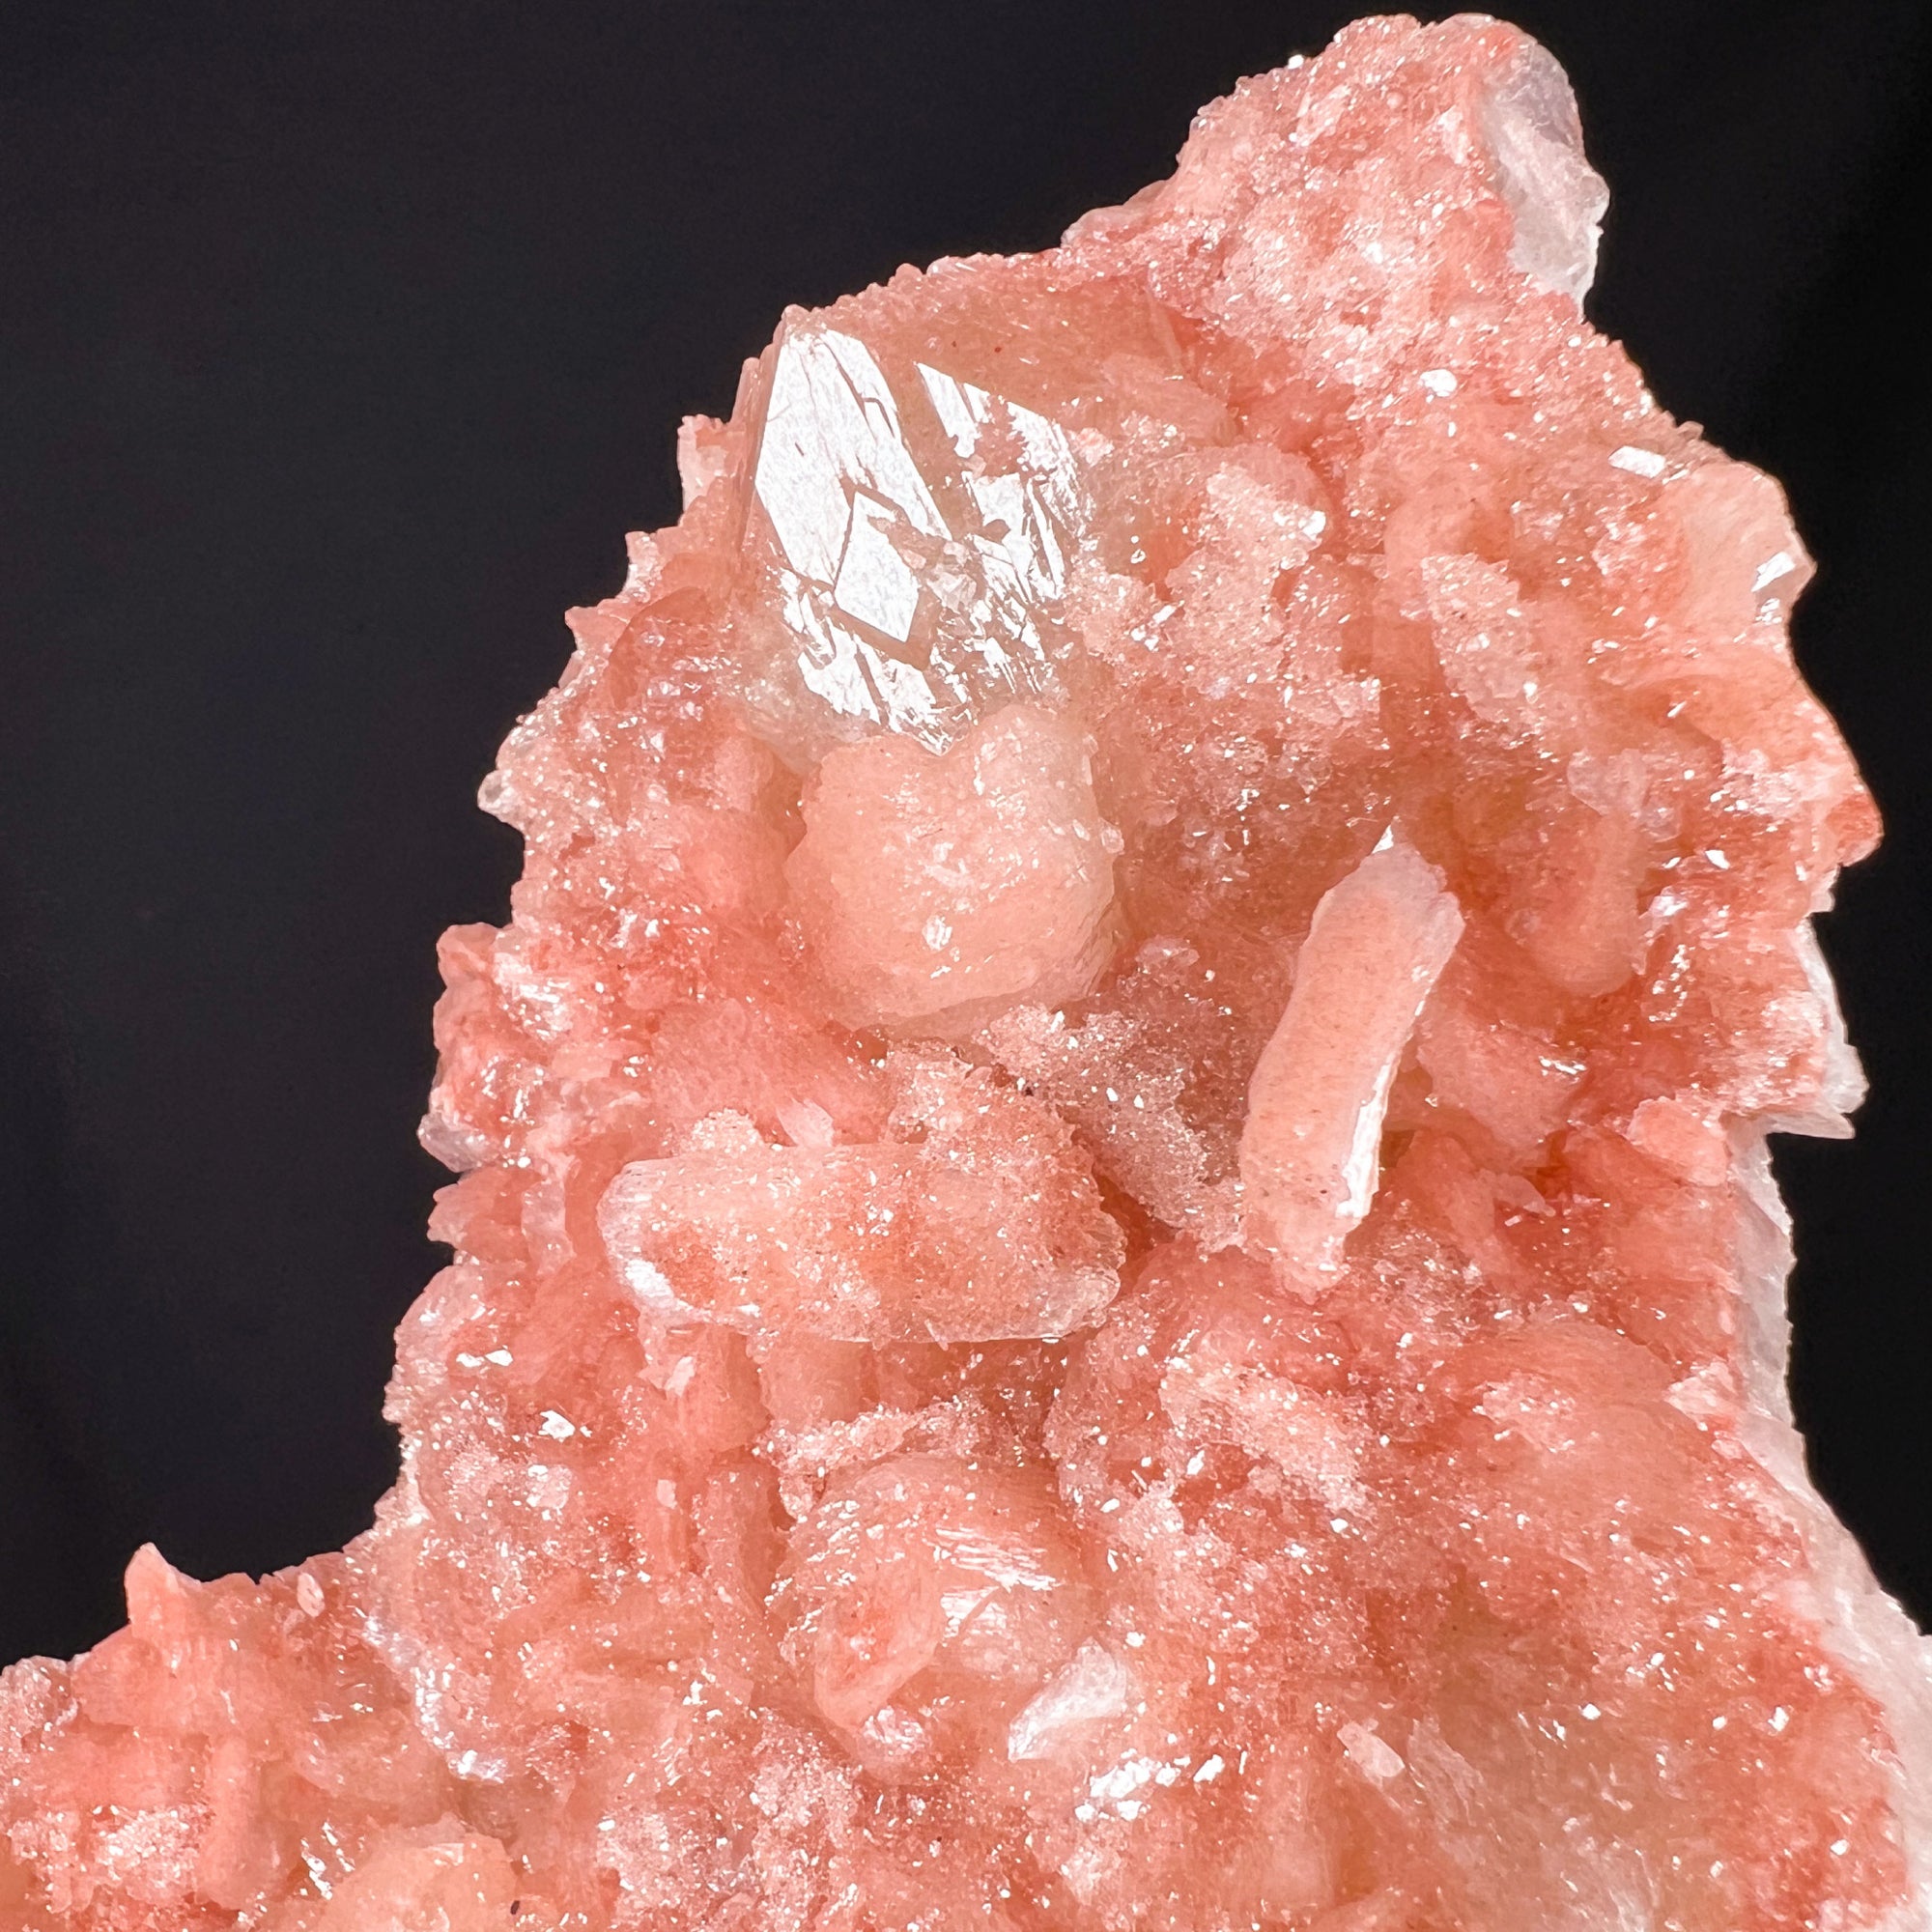 Peach Colored Stilbite Crystals with Apophyllite Crystals